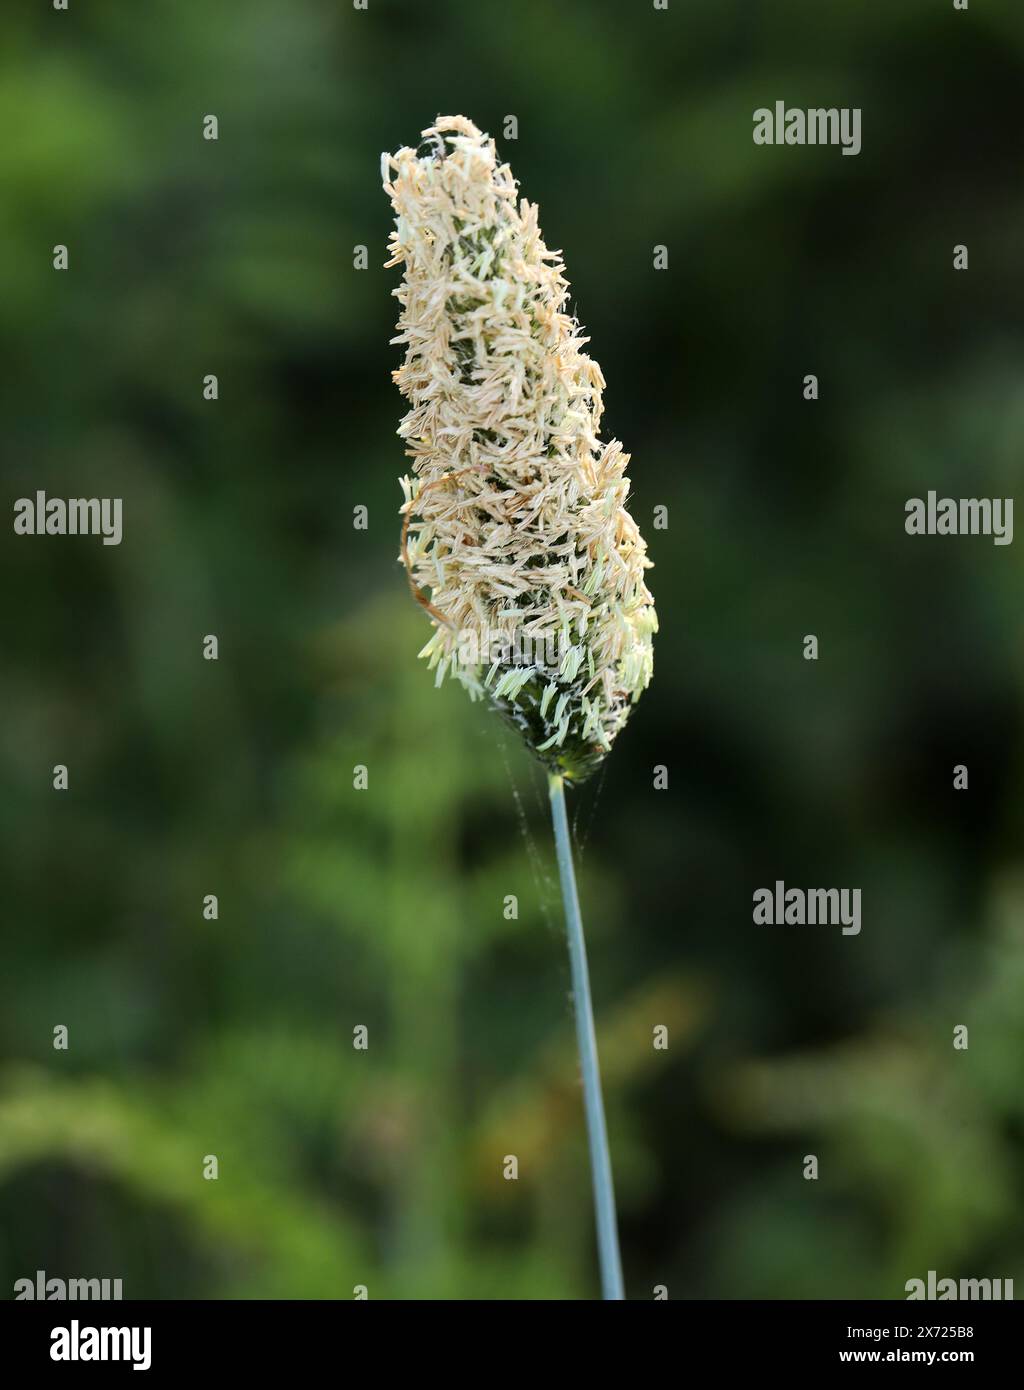 Timothy, Timothy-grass, Meadow Cat's-tail or Common Cat's Tail, Phleum pratense, Poaceae. An abundant perennial grass native to most of Europe. Stock Photo